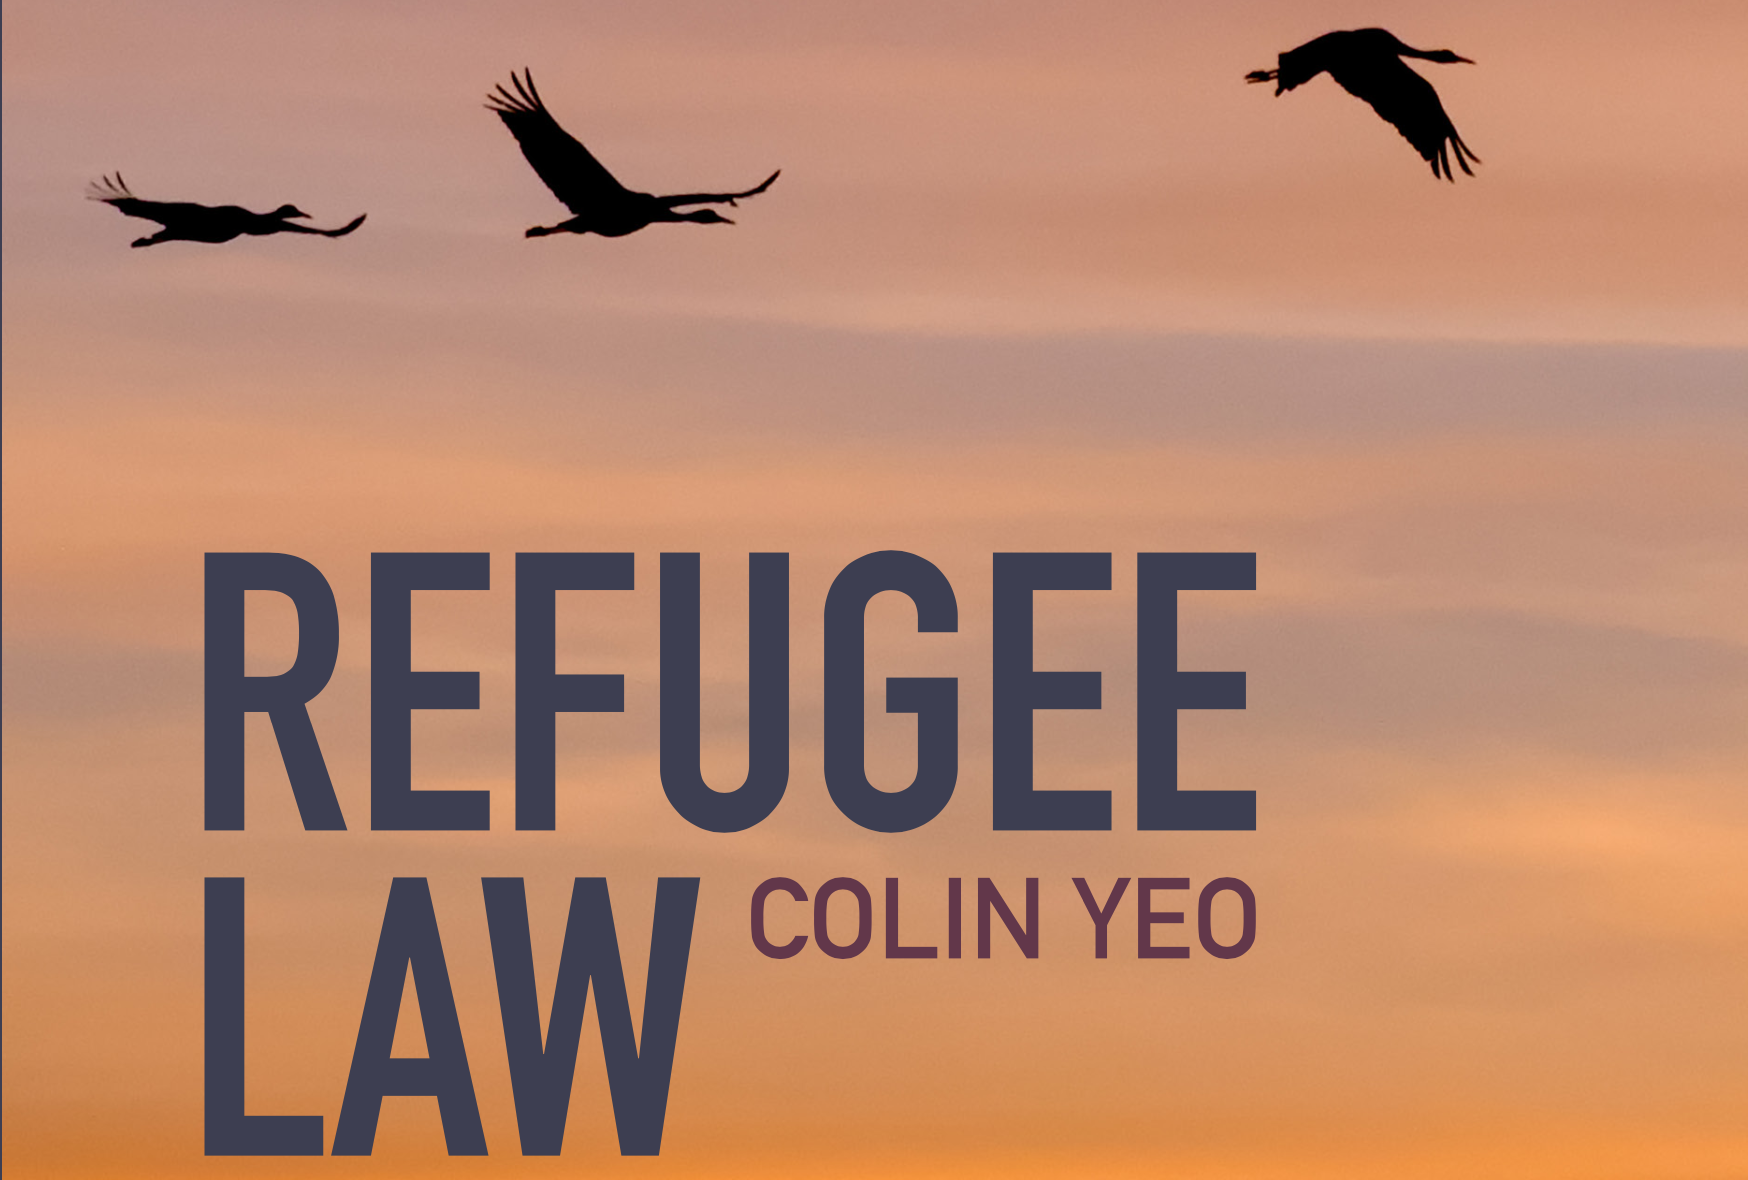 Colin’s refugee law textbook is published today